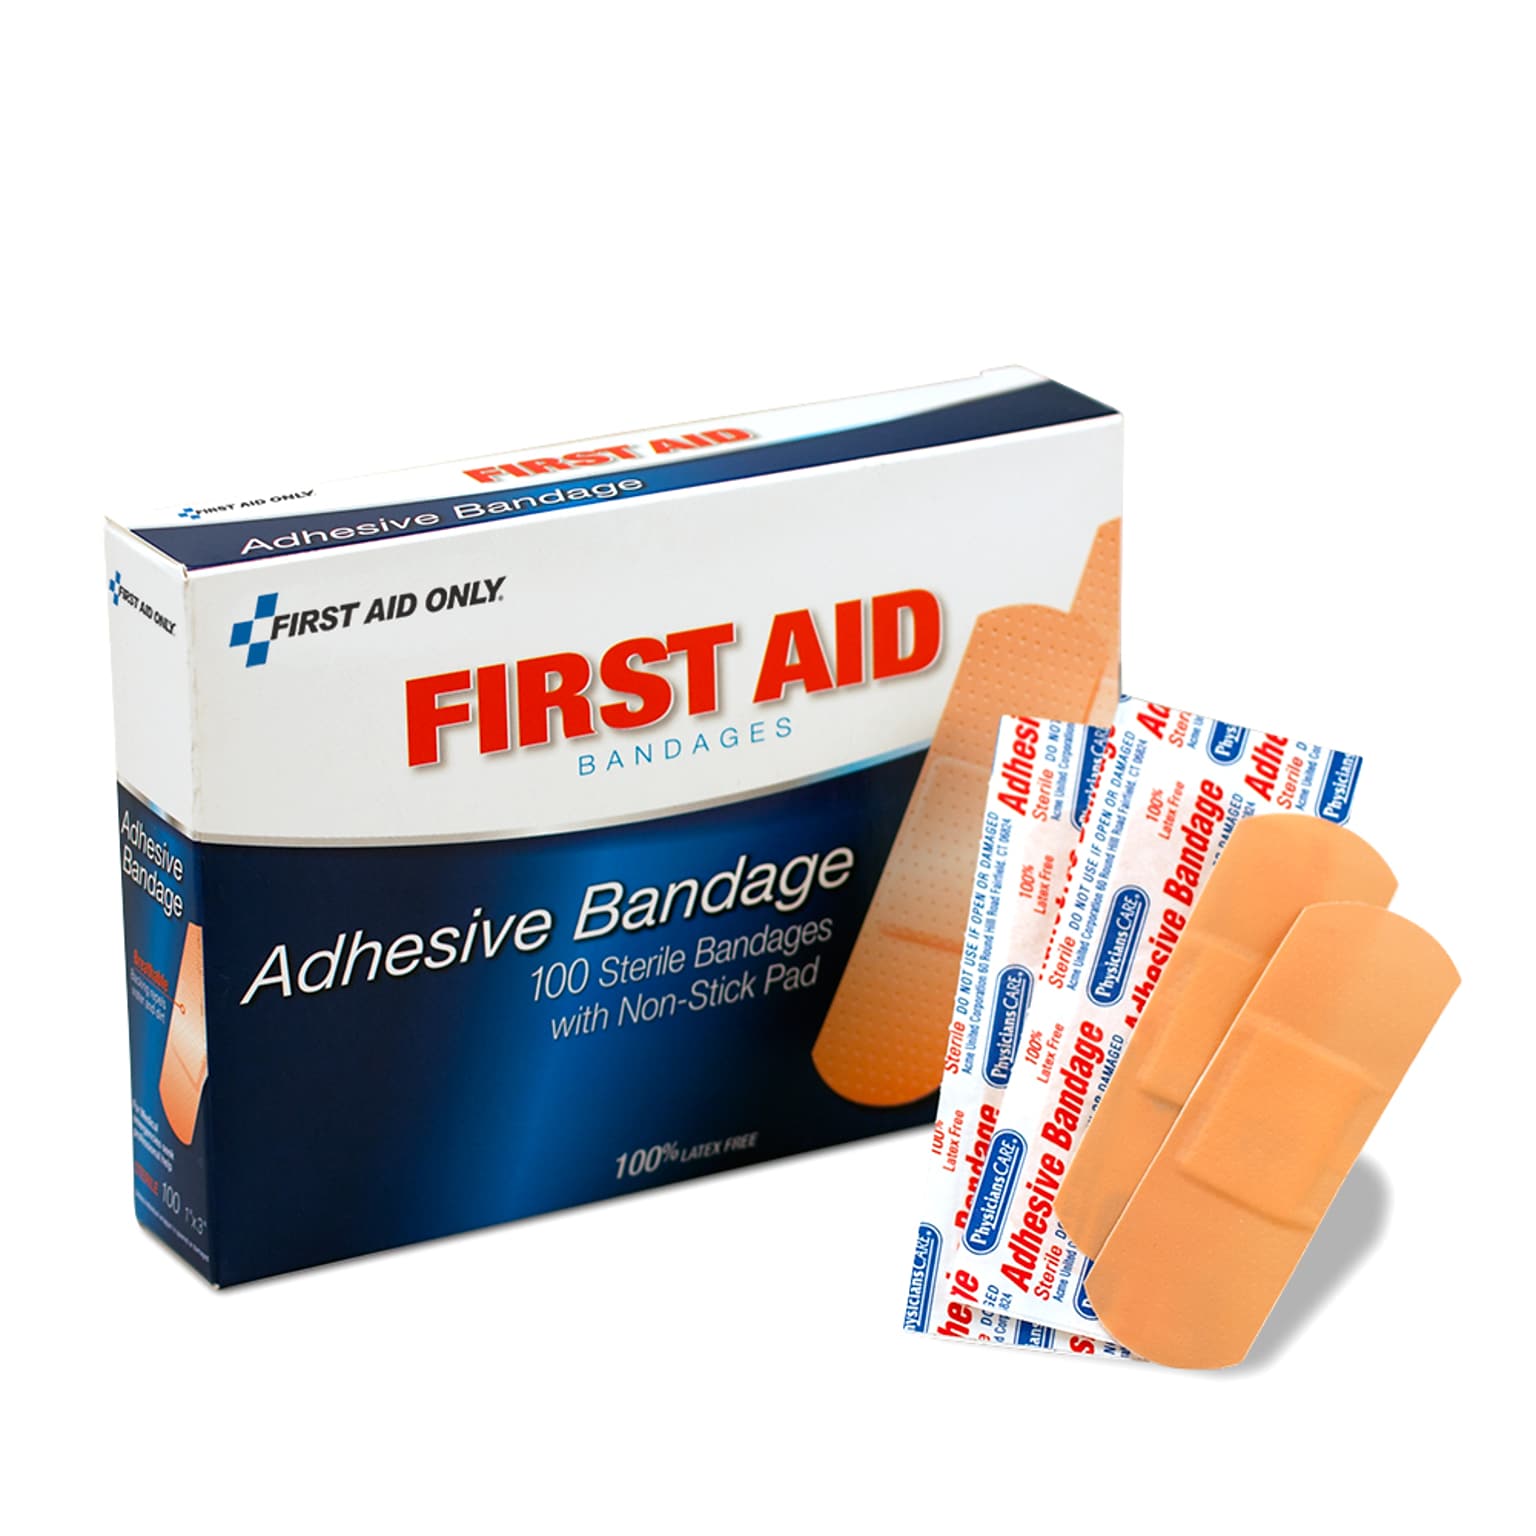 First Aid Only 1W x 3L Adhesive Bandages, 100/Box (90097)